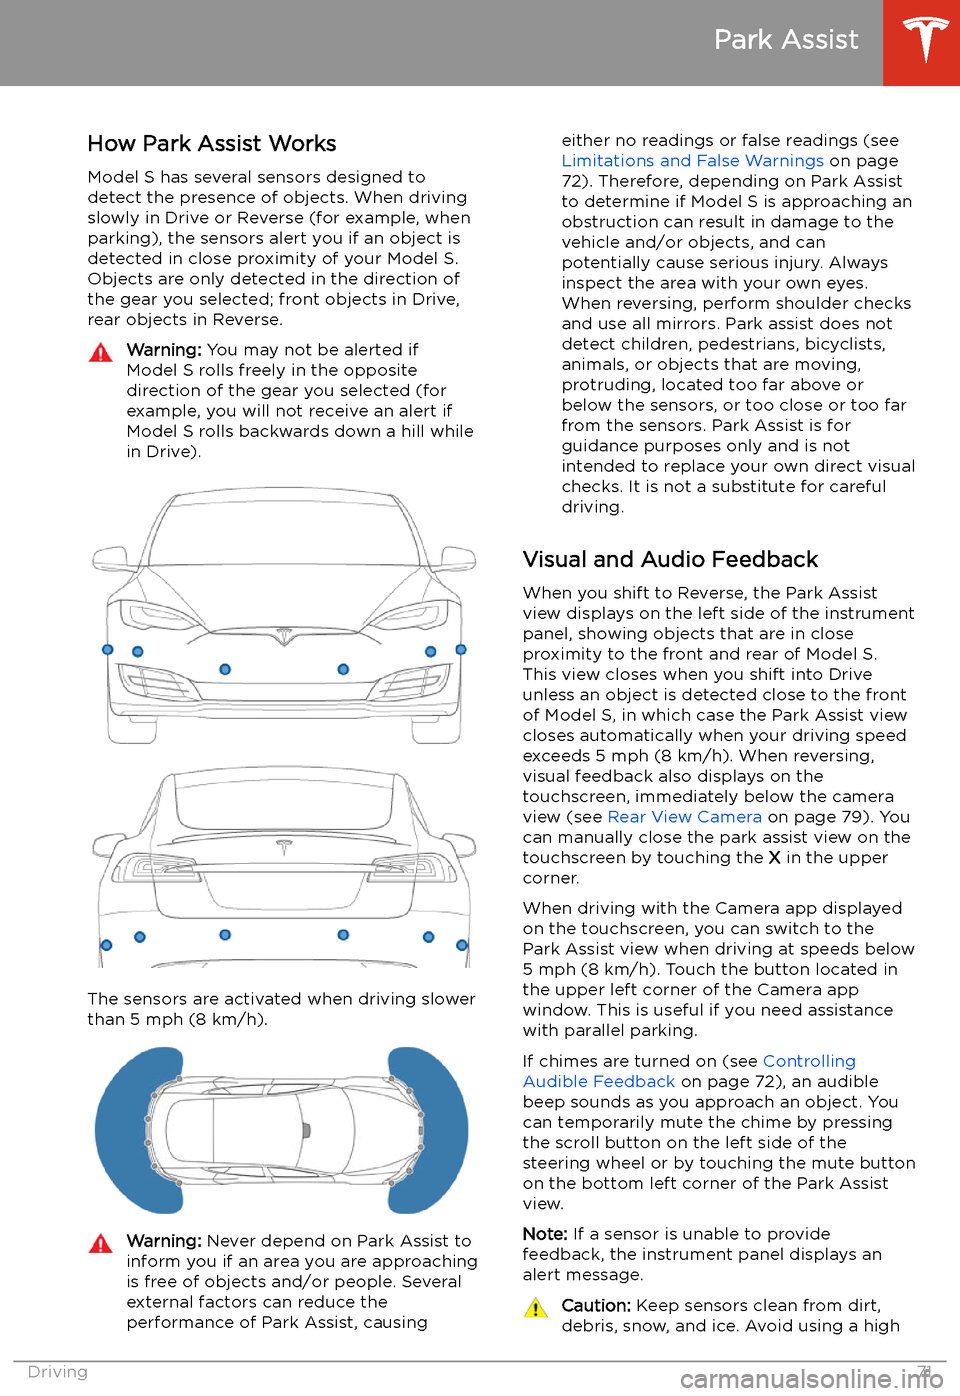 TESLA MODEL S 2020  Owners Manual Park Assist
How Park Assist Works
Model S has several sensors designed to detect the presence of objects. When drivingslowly in Drive or Reverse (for example, when
parking), the sensors alert you if a